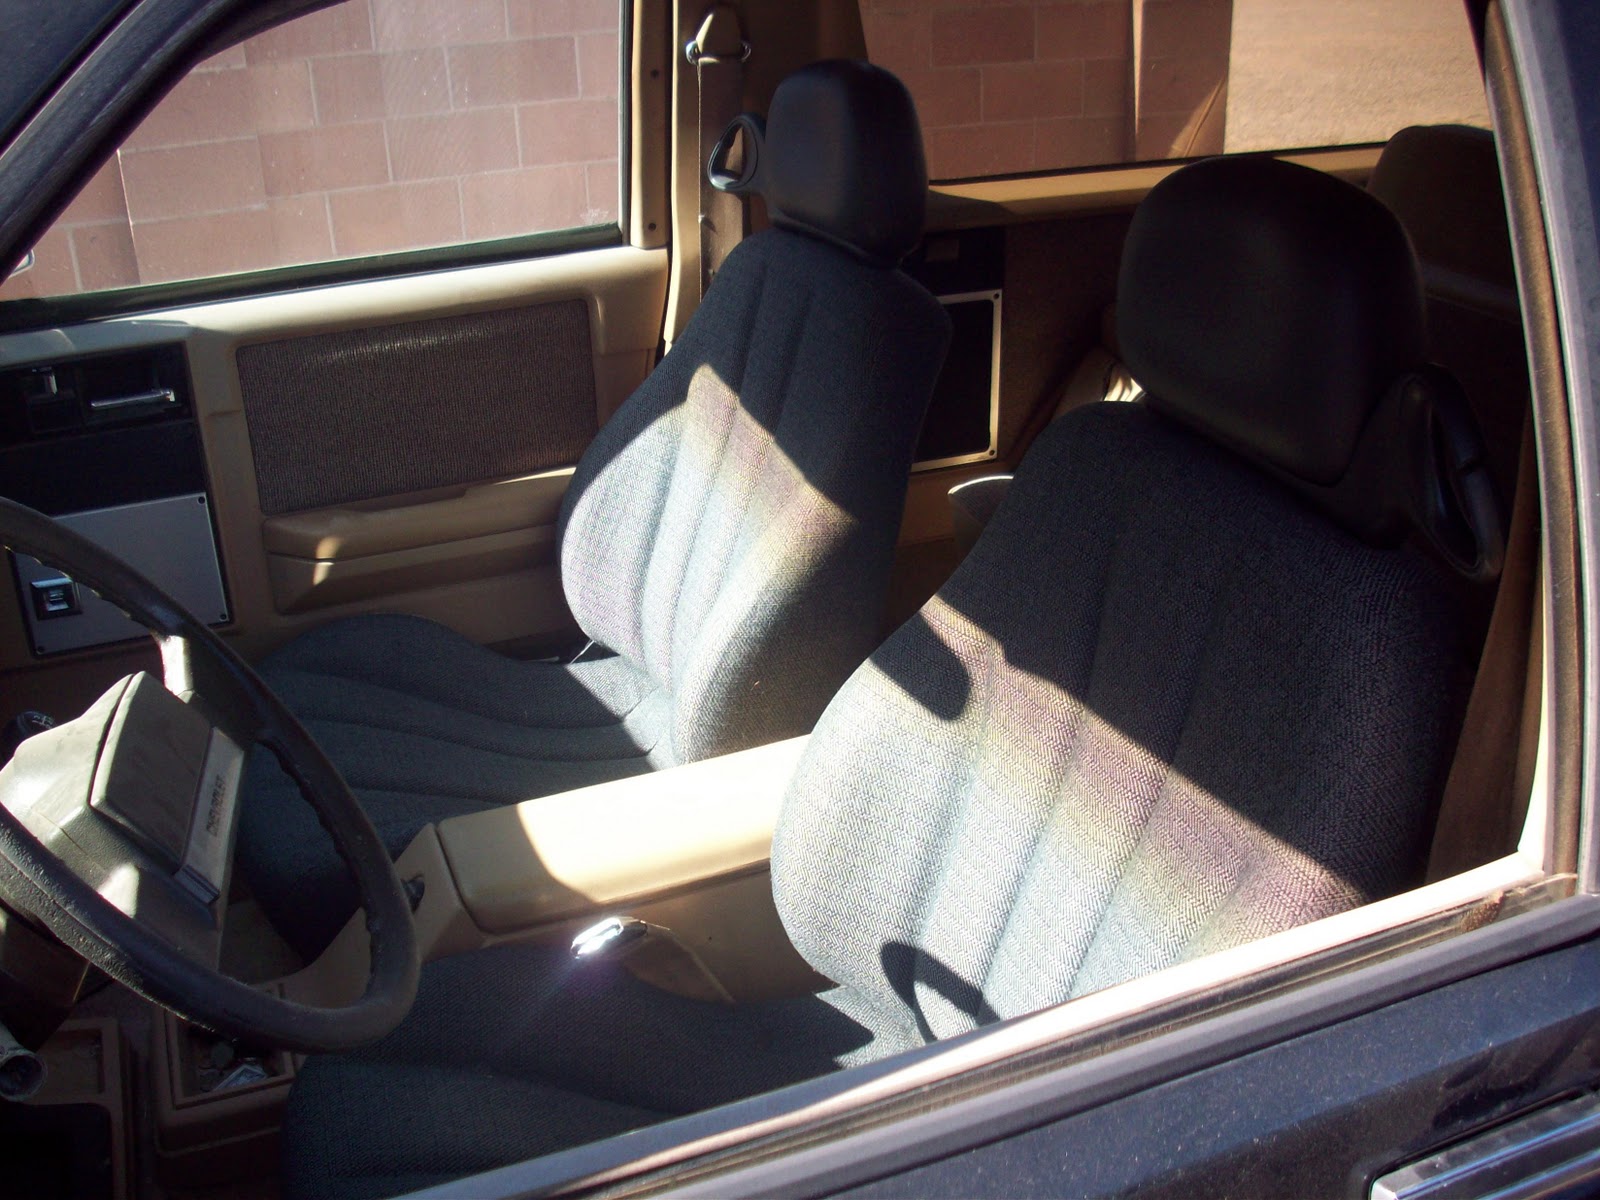 Do It Yourself Repairs for Home, Car, Truck, Computer.: S10 Blazer Seat